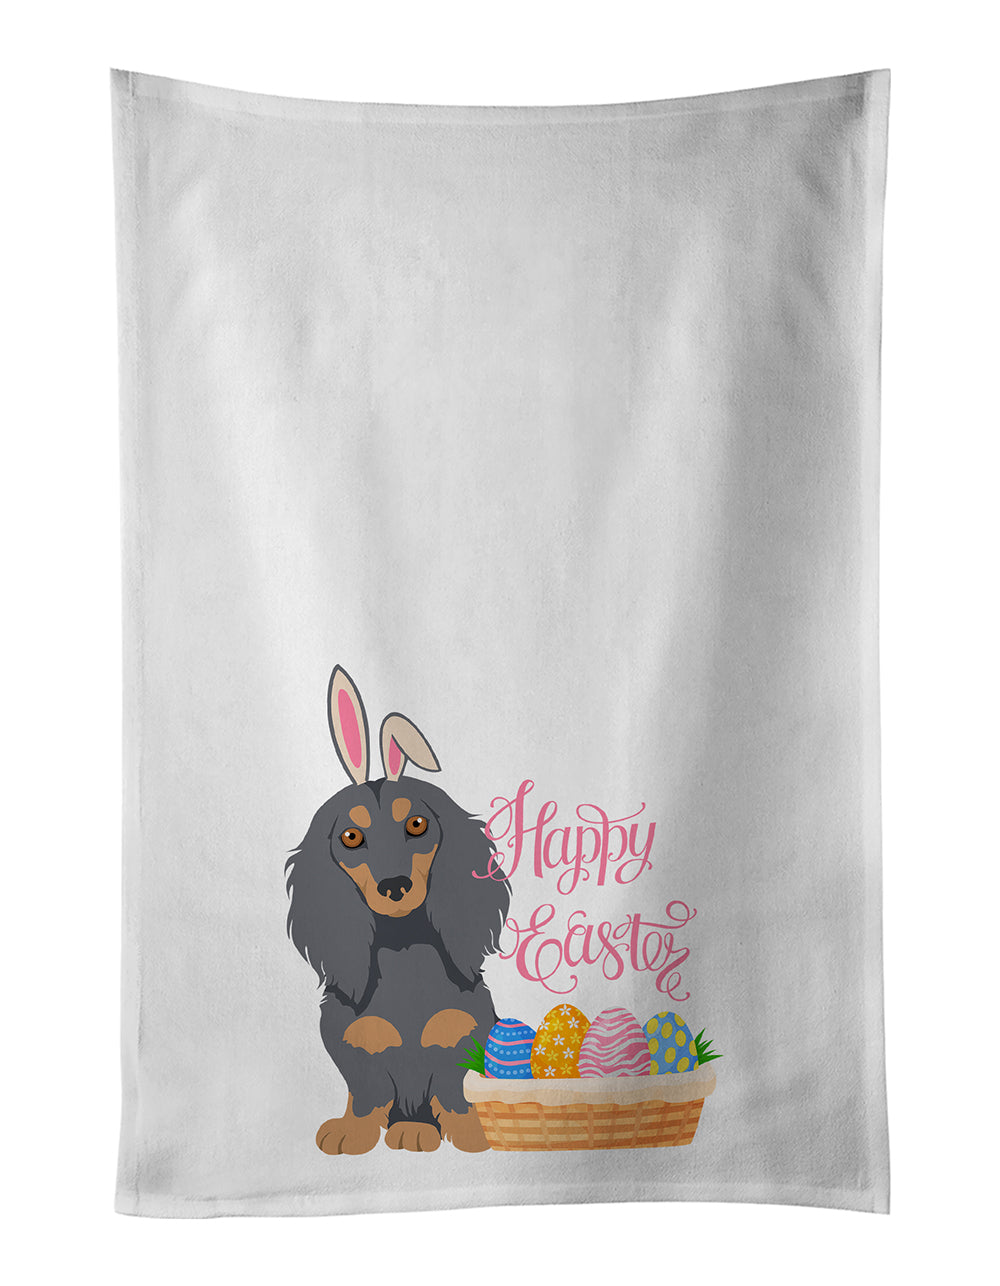 Buy this Longhair Blue and Tan Dachshund Easter White Kitchen Towel Set of 2 Dish Towels